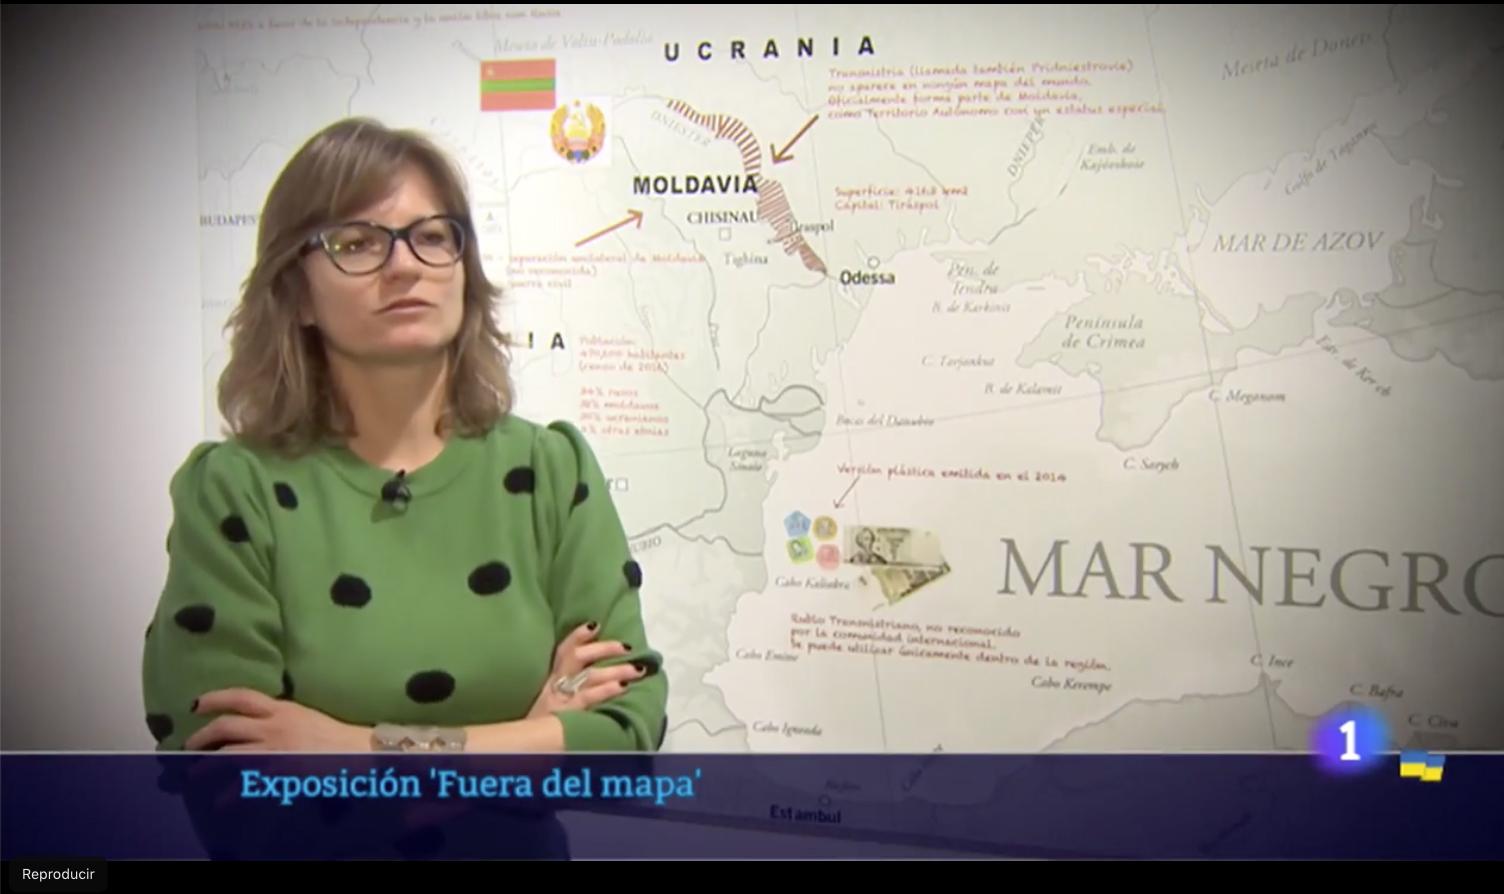 Aragon TV speaks about my solo exhibition "OFF THE MAP" in f/DKV, Zaragoza